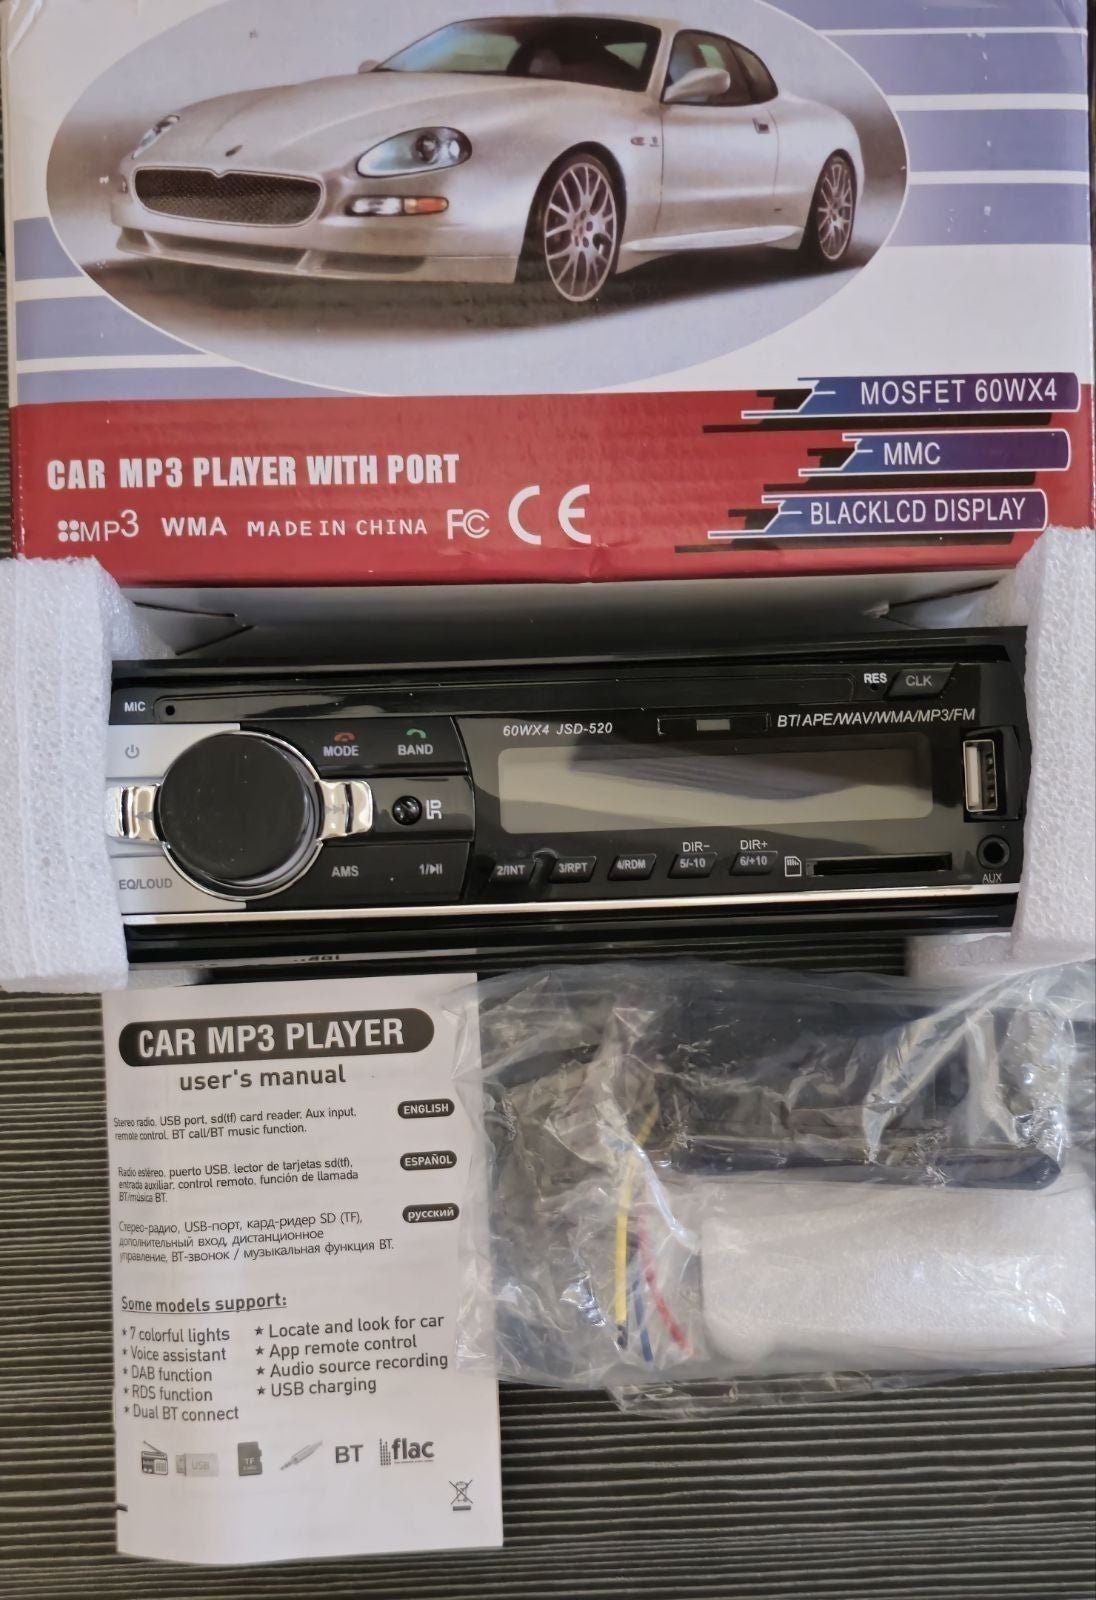 CAR STEREO MP3 PLAYER WITH PORT p1835QMmE